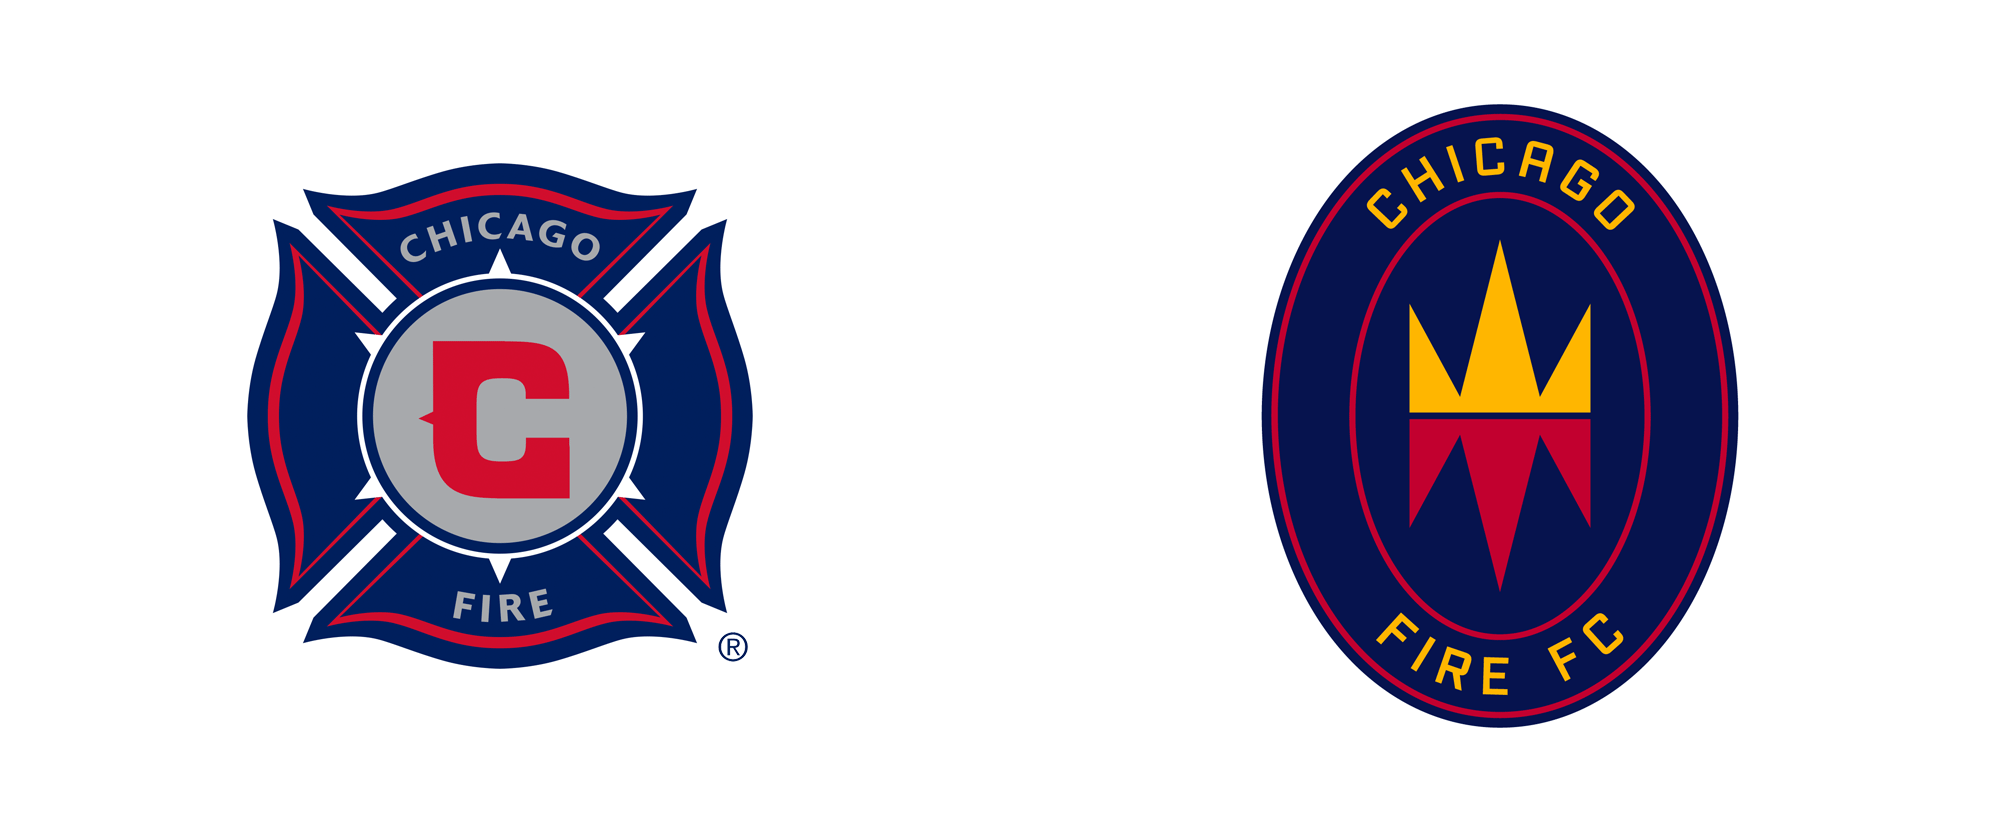 New Logo for Chicago Fire FC by Doubleday & Cartwright